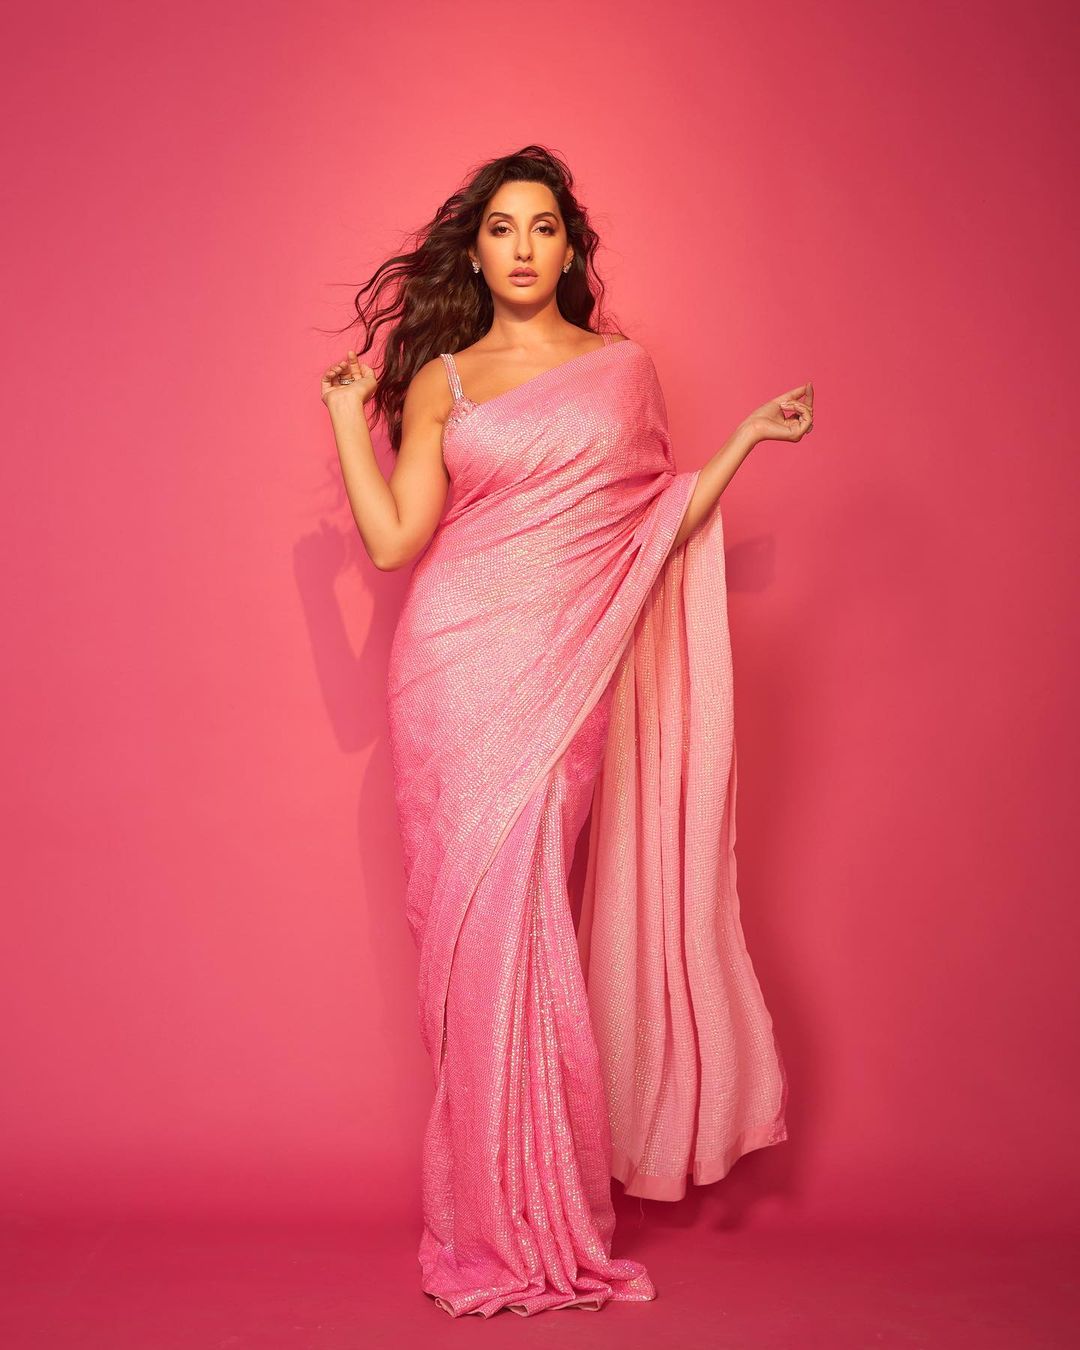 Nora Fatehi looks ethereal in the pink sequinned saree. 